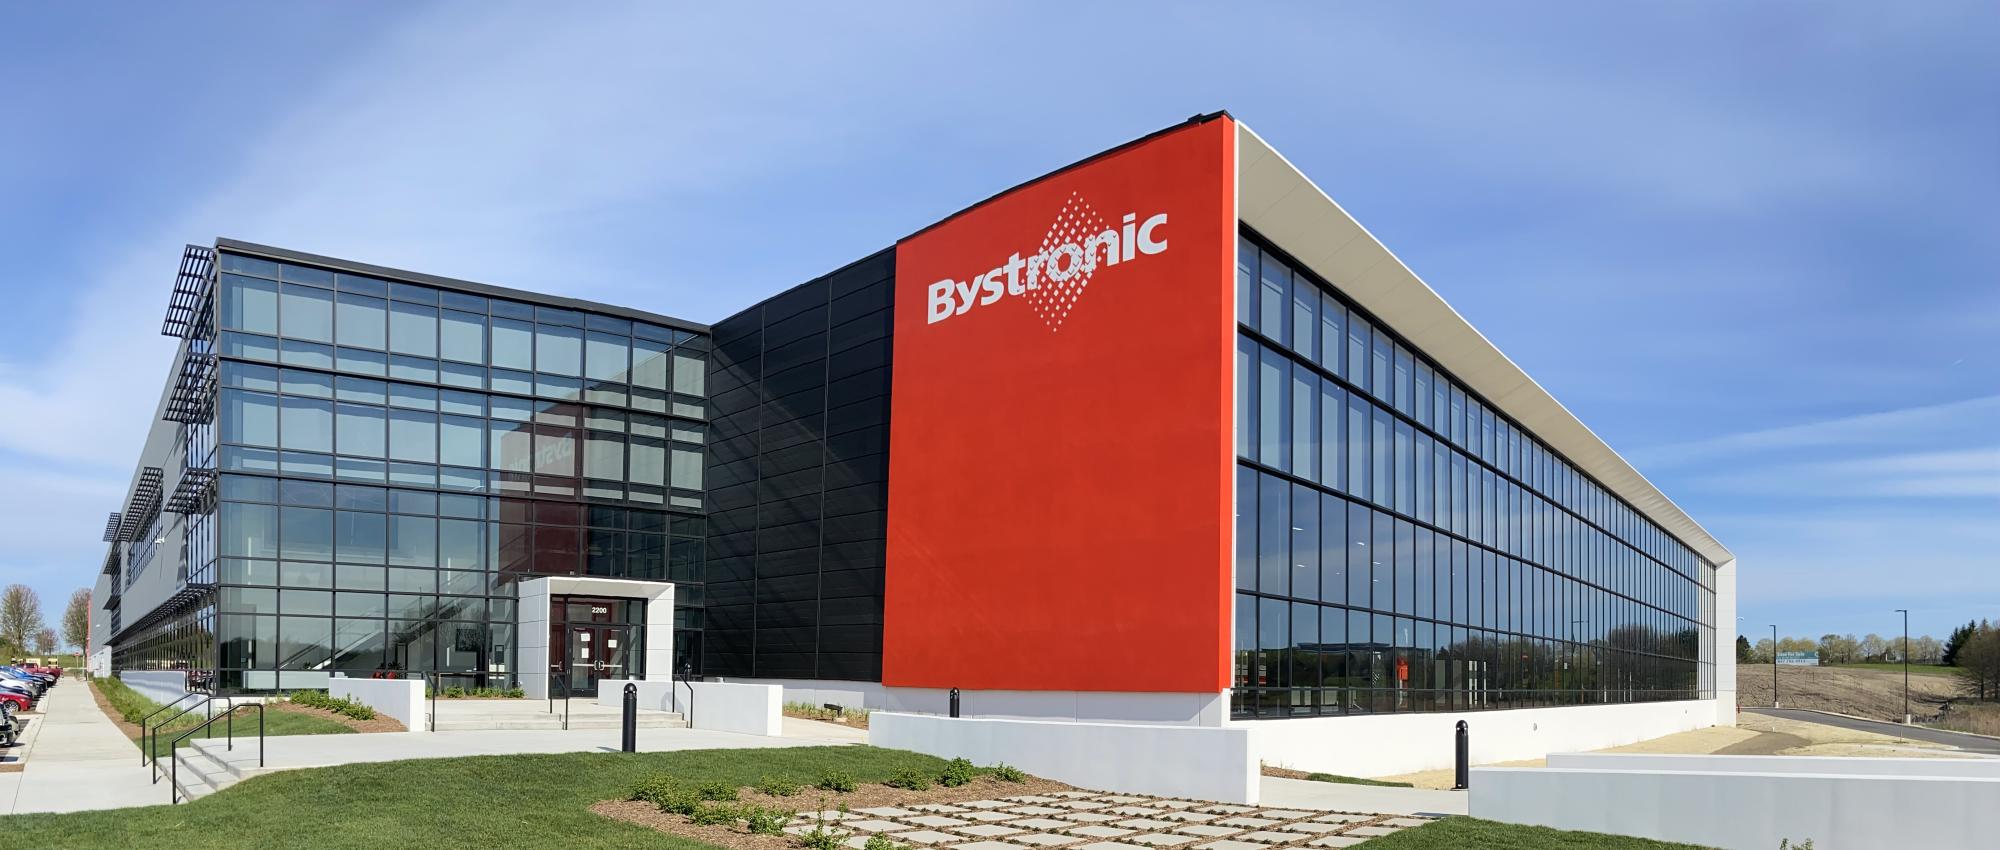 Bystronic building in Hoffman Estates with red entry